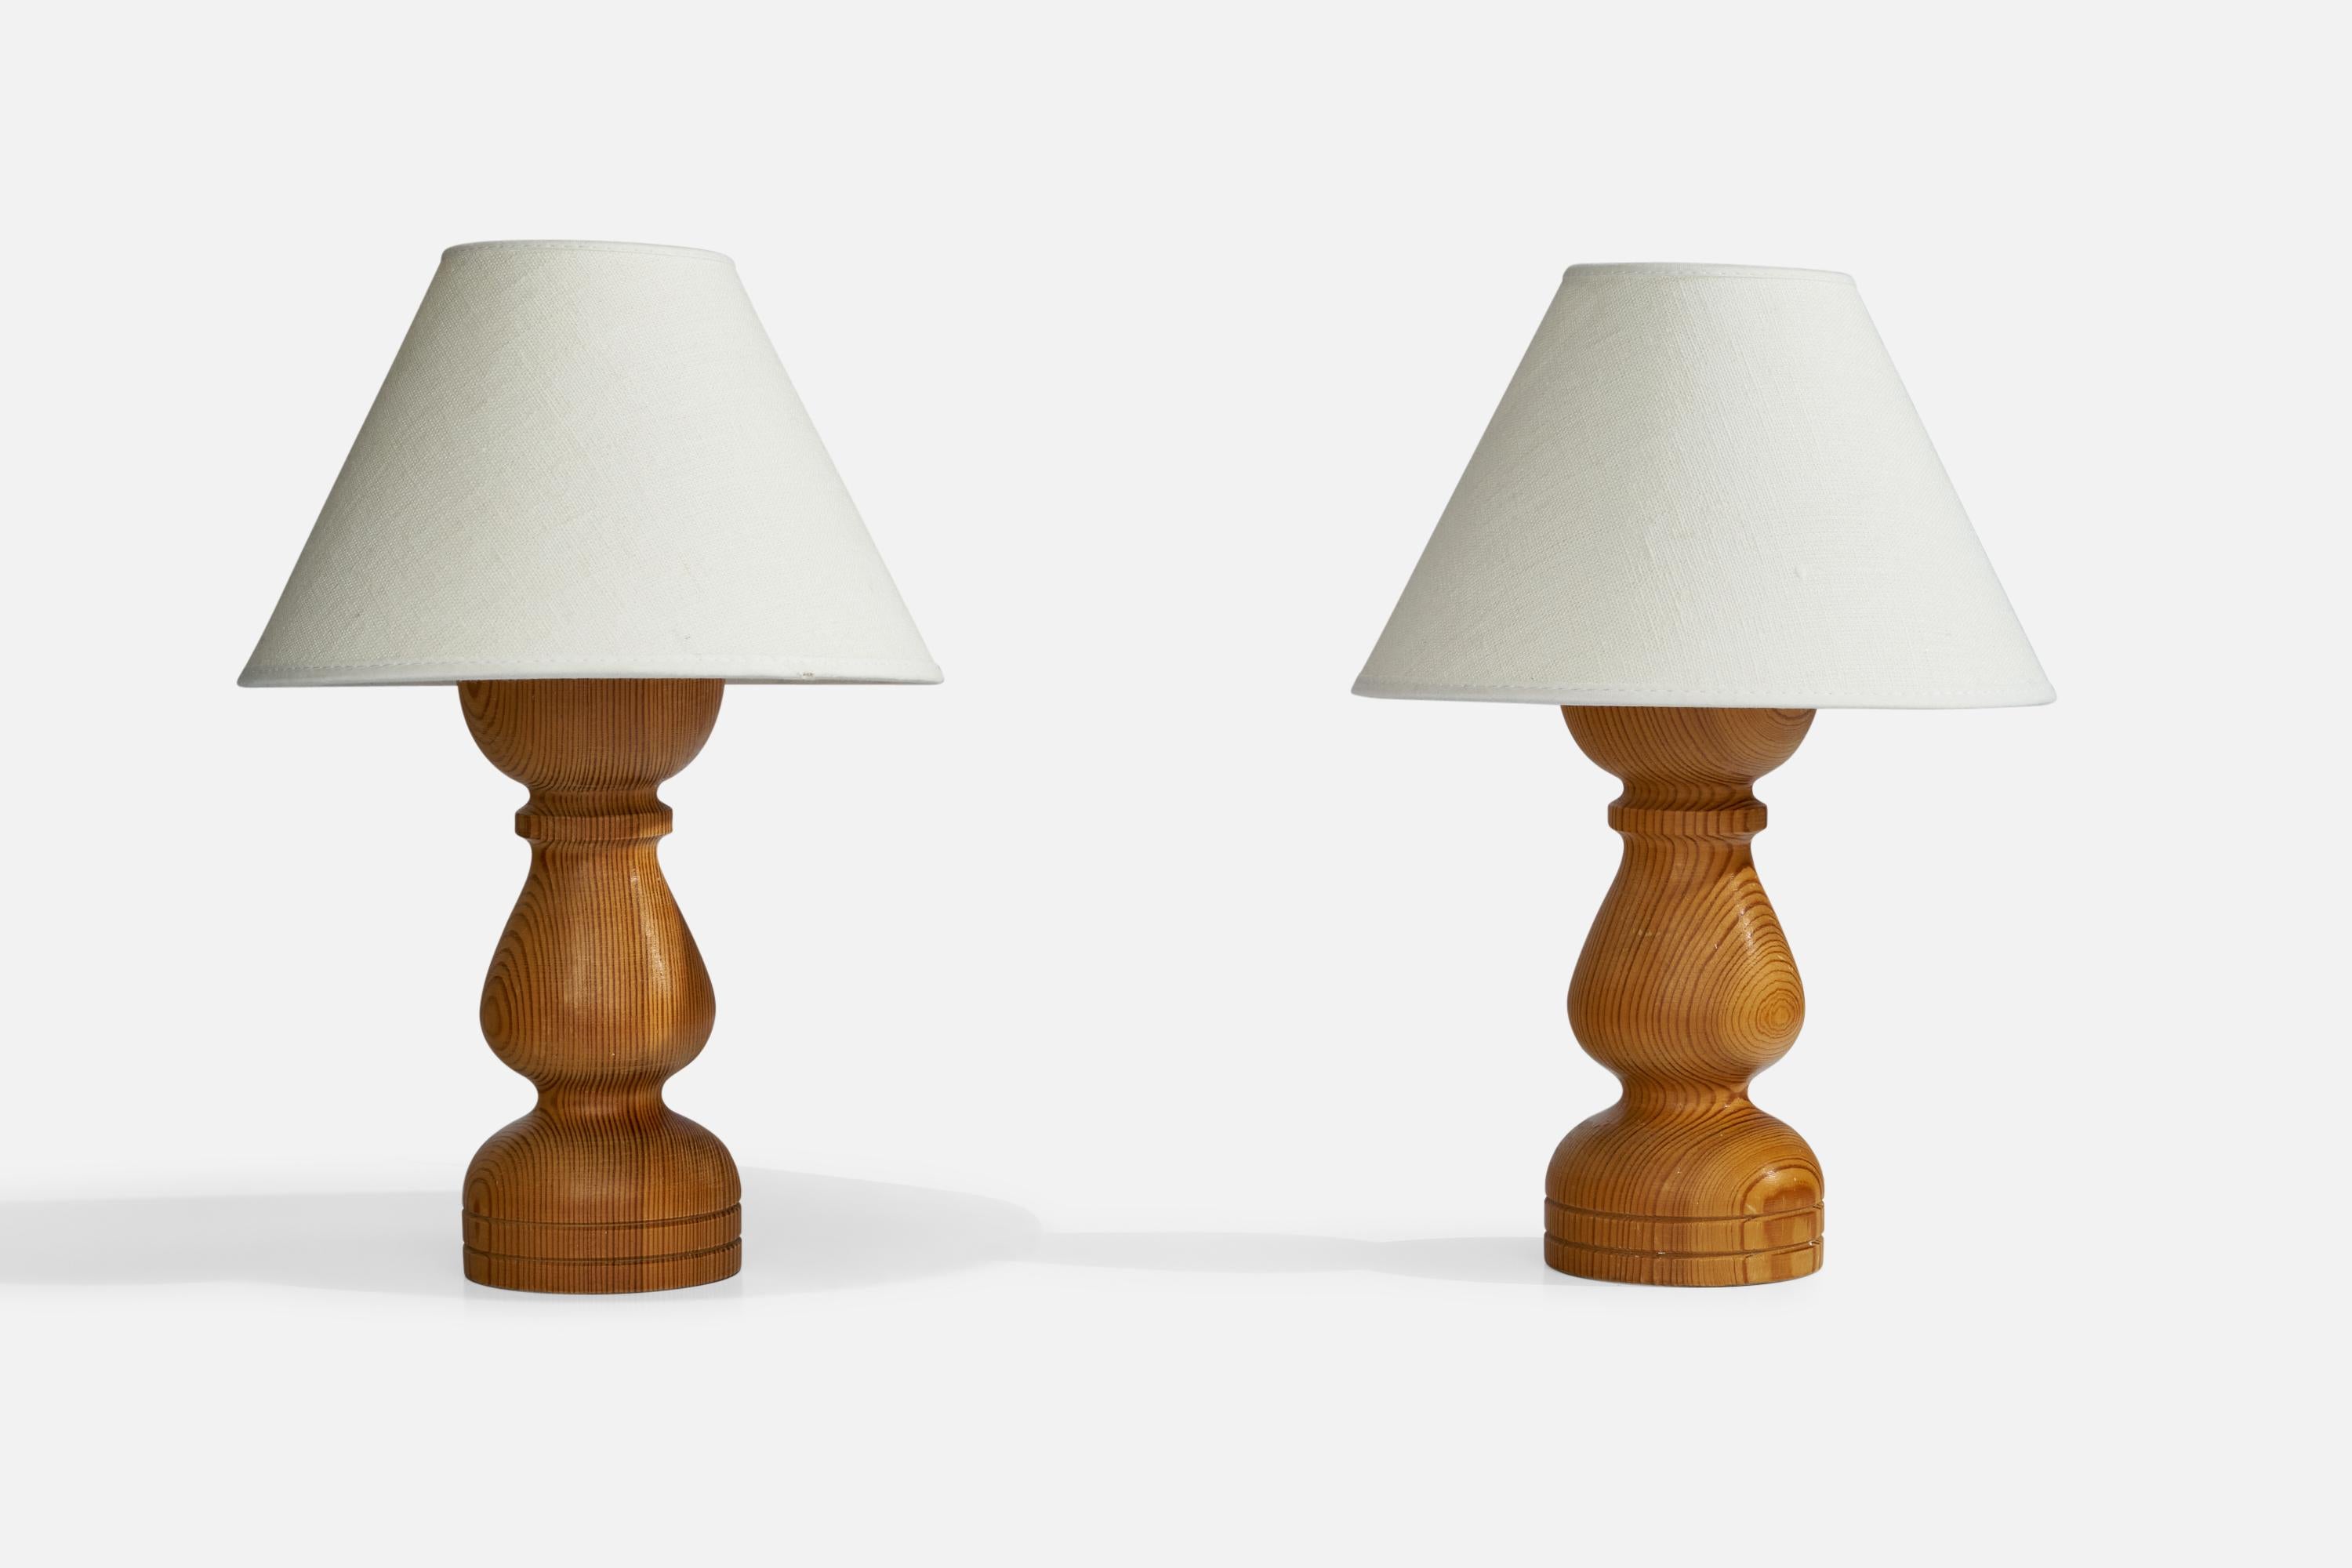 A pair of pine table lamps designed and produced in Sweden, 1970s.

Dimensions of Lamp (inches): 8.5”  H x 3” Diameter
Dimensions of Shade (inches): 3”  Top Diameter x 8” Bottom Diameter x 5.5” H
Dimensions of Lamp with Shade (inches): 11.5” H x 8”